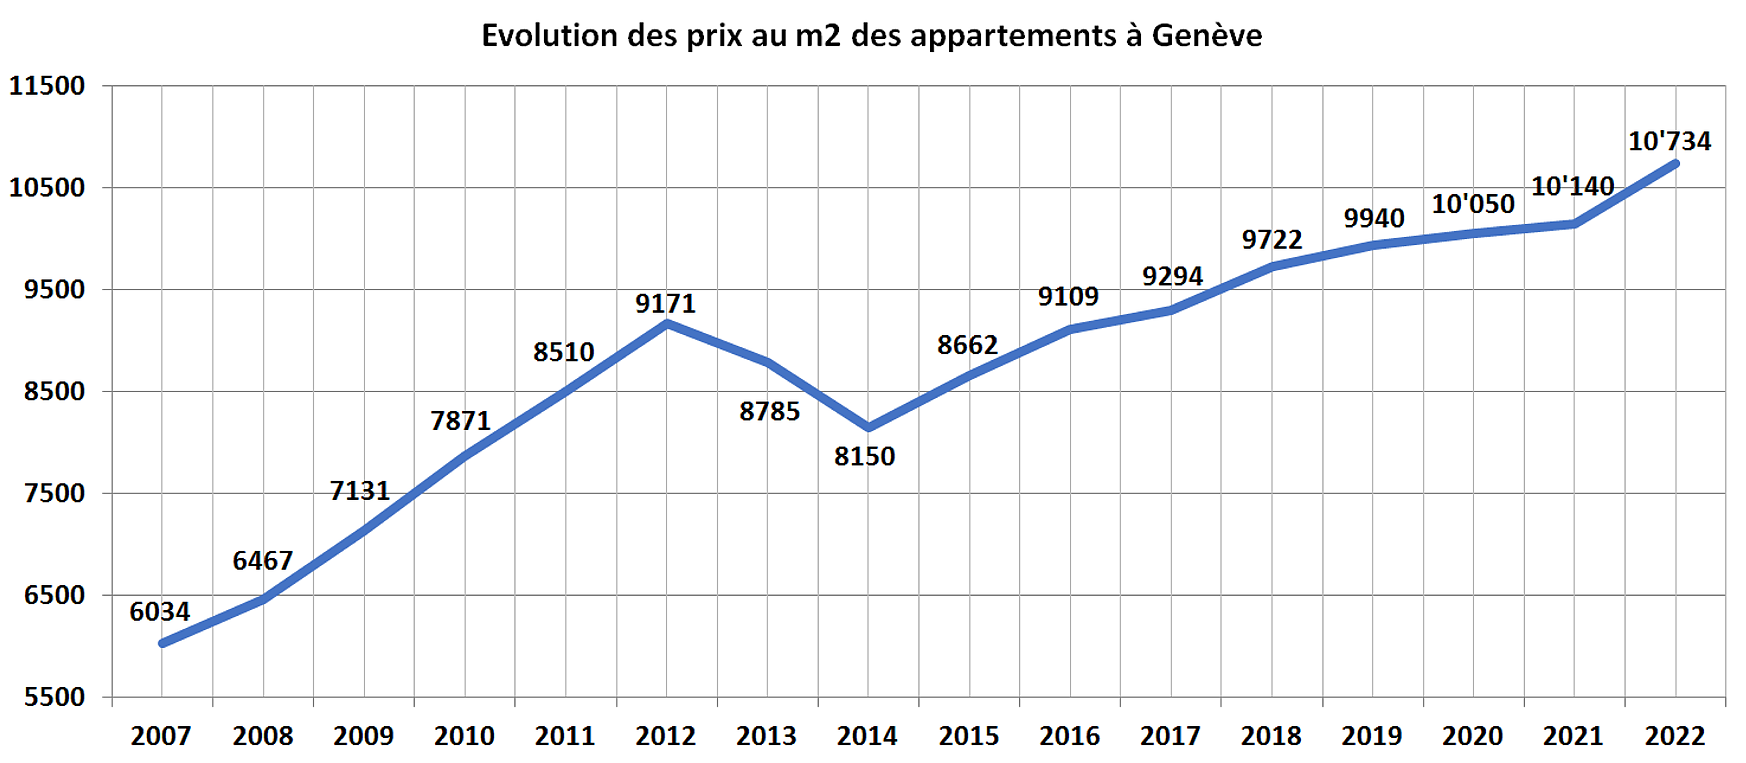 surchauffe immobiliere appartement geneve 2022